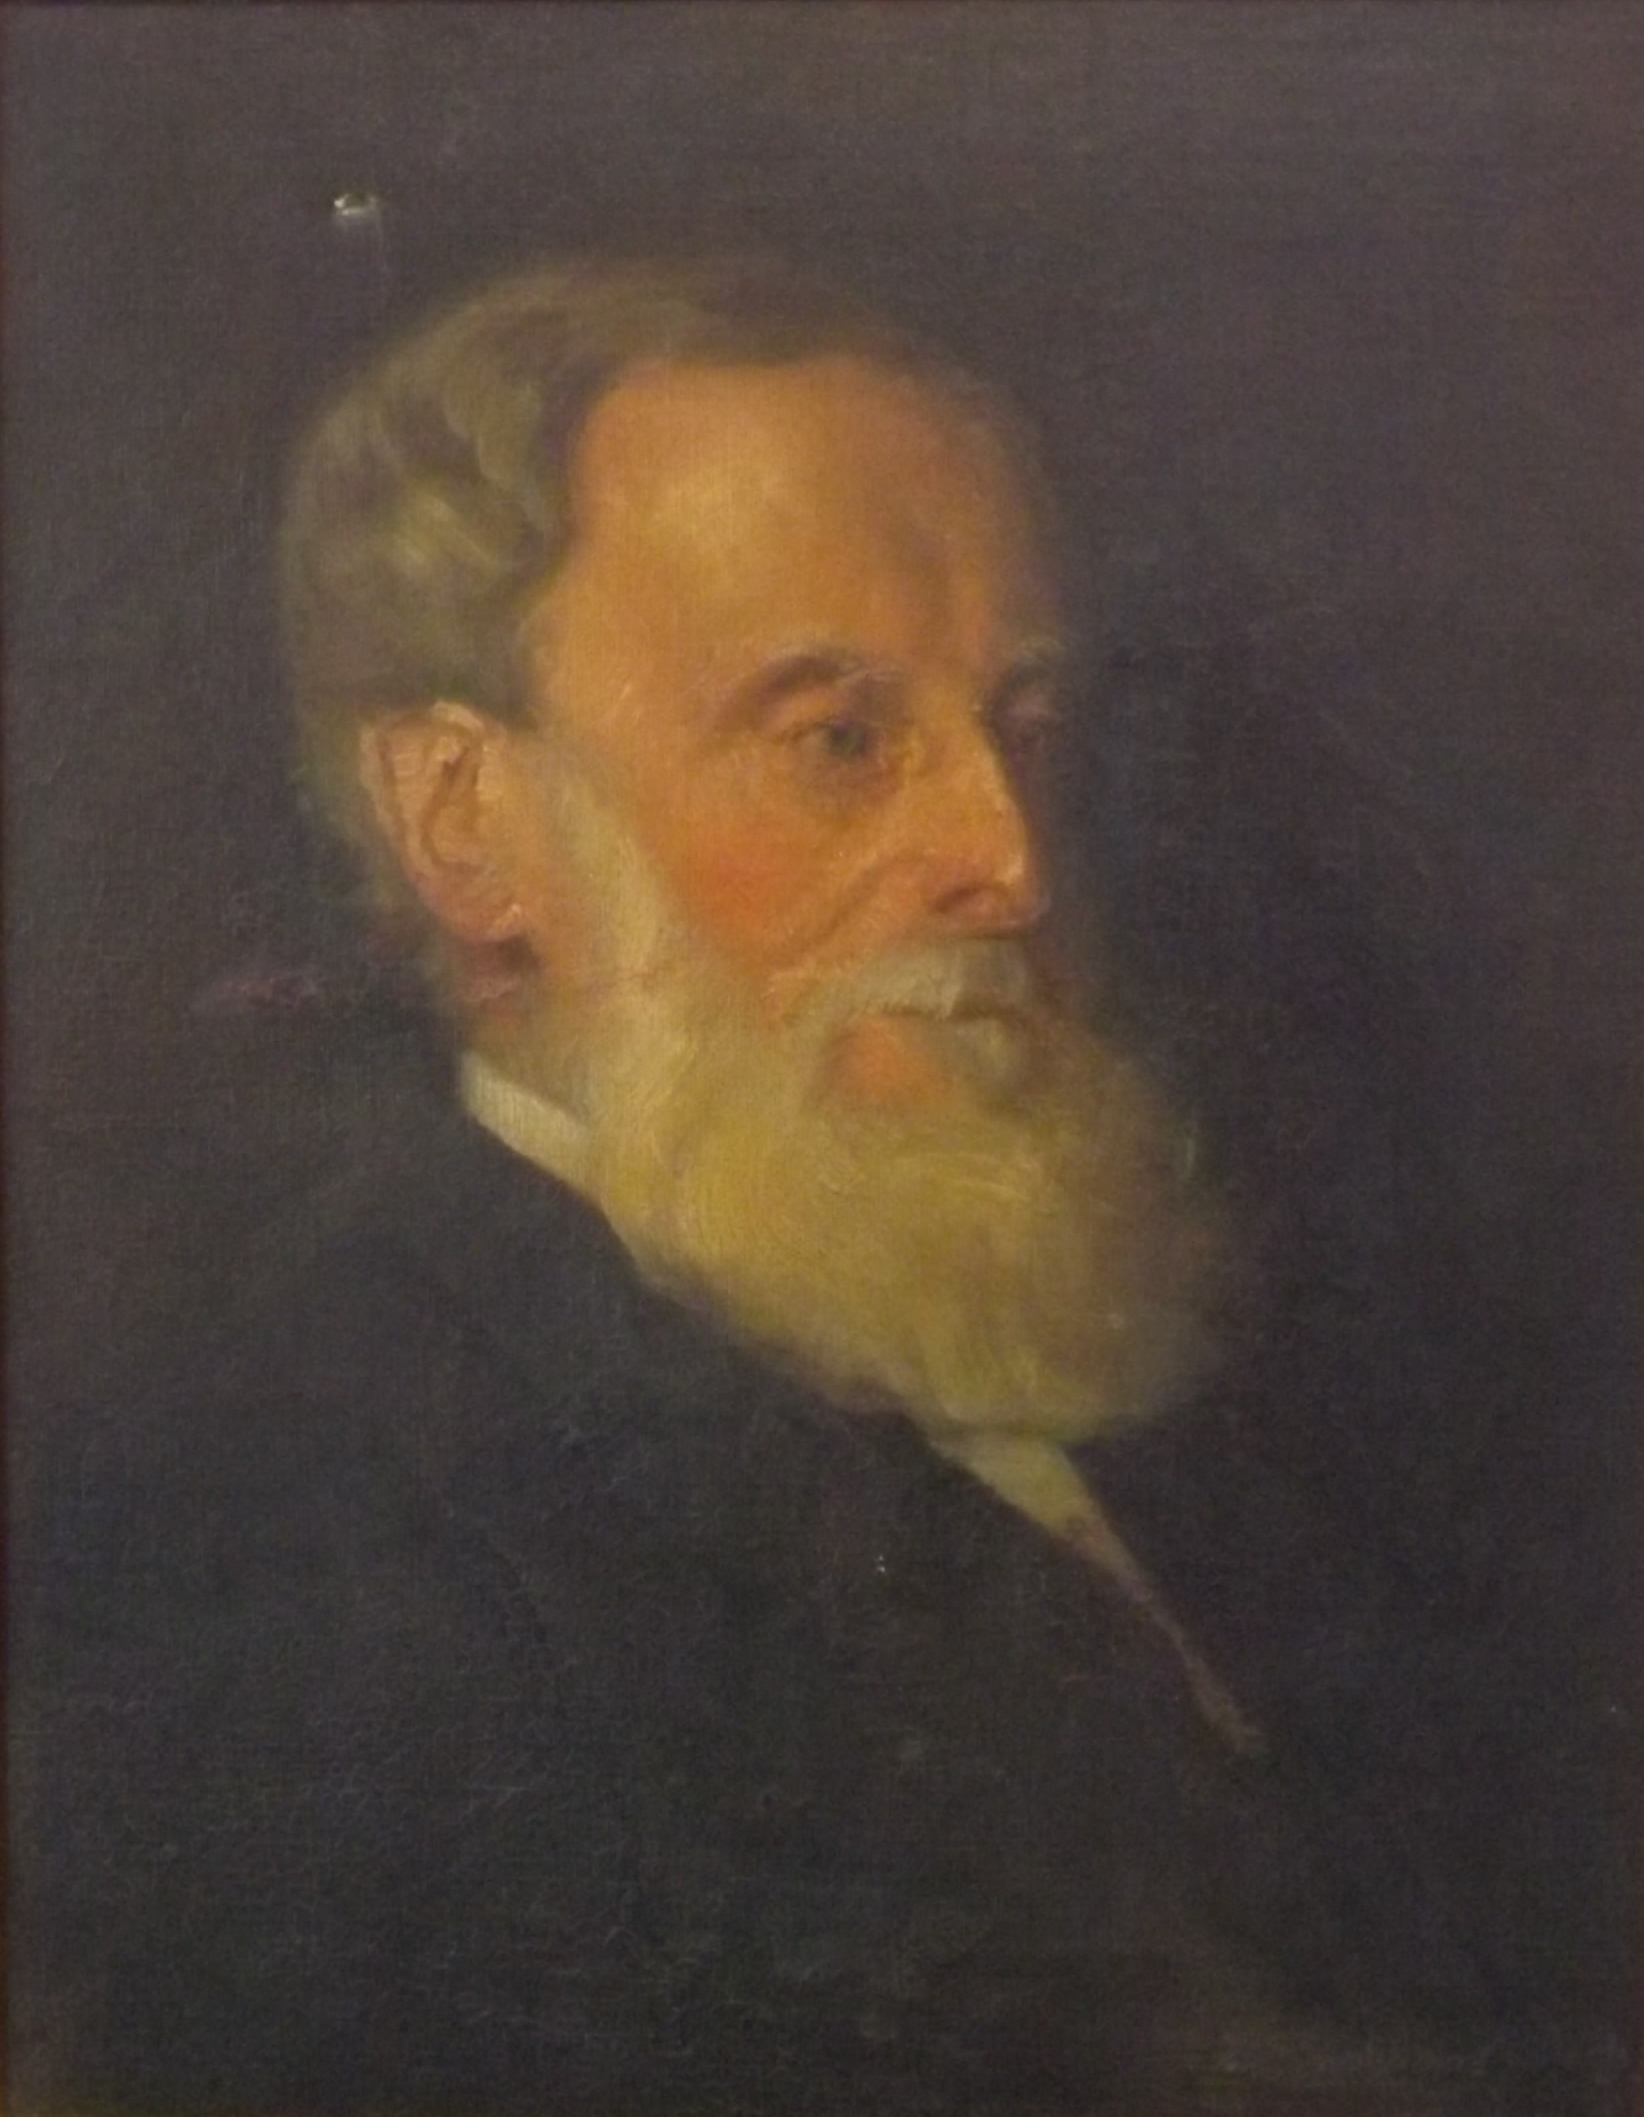 E. SHERWOOD
Portrait of a bearded gentleman
Oil on canvas
Signed
Together with a 19th century
oil on